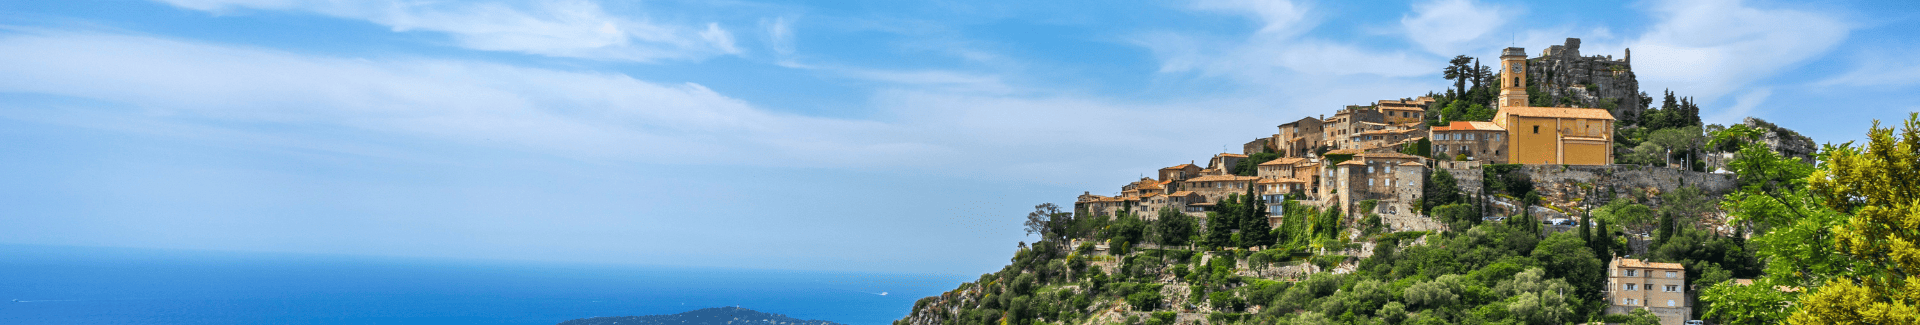 Èze France - The Definitive Luxury Guide 